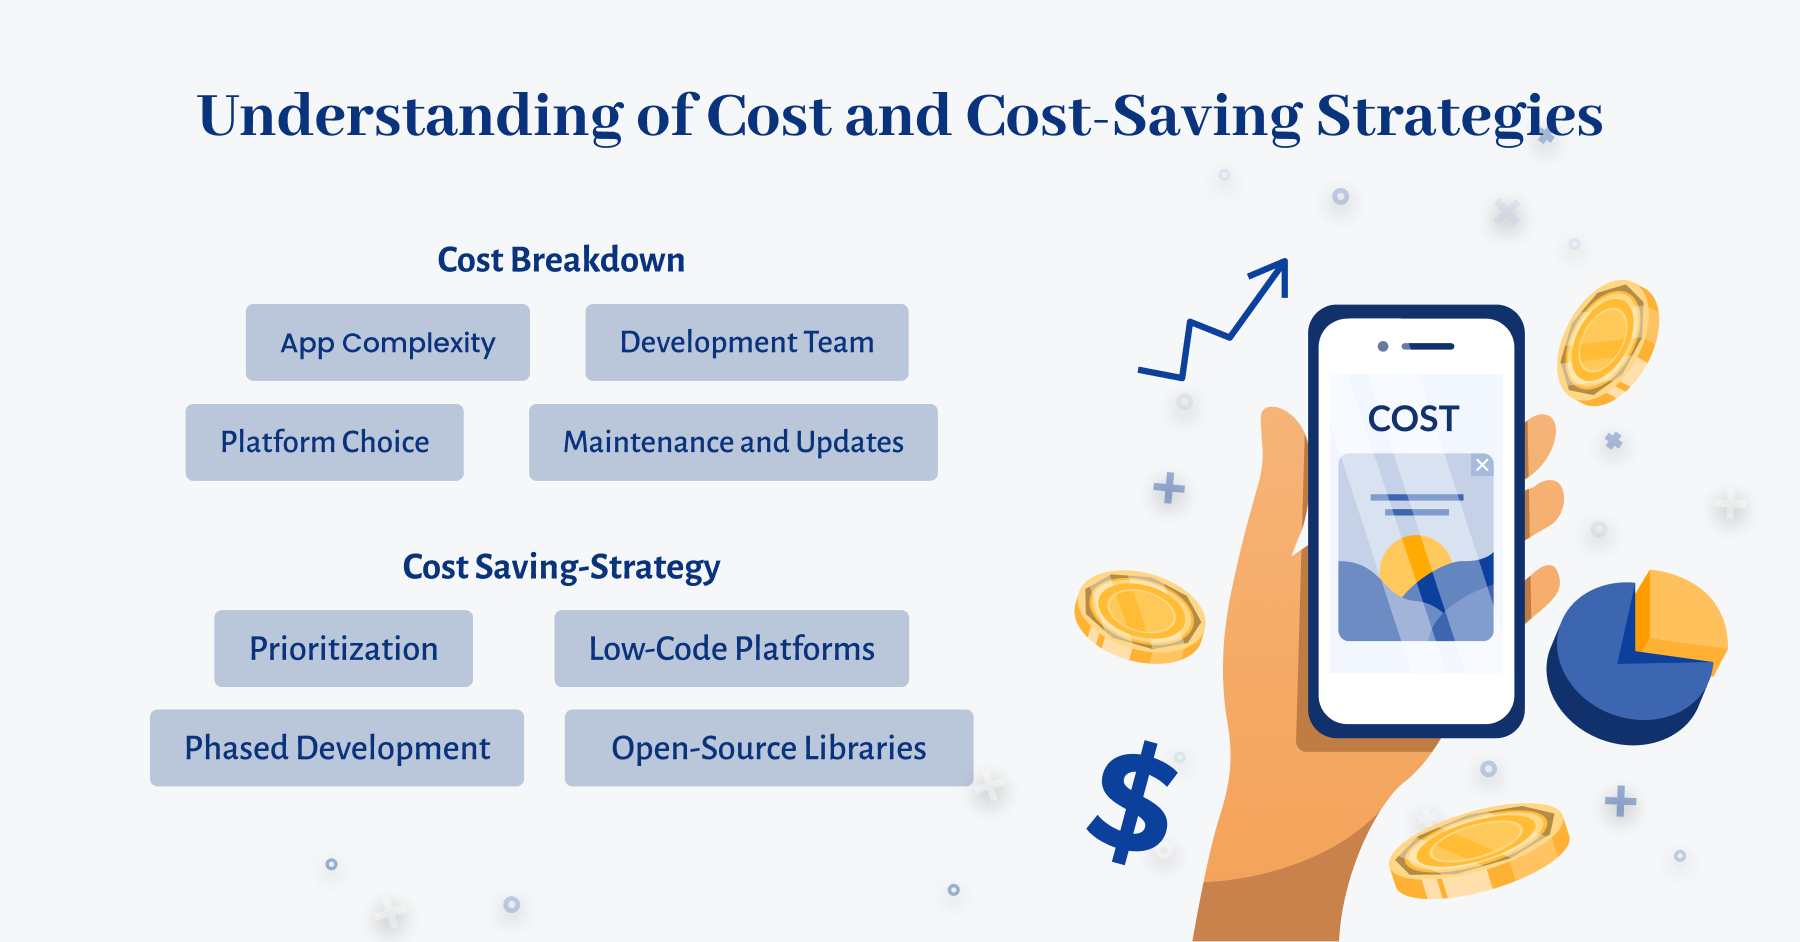 Understanding of Cost and Cost-Saving Strategies